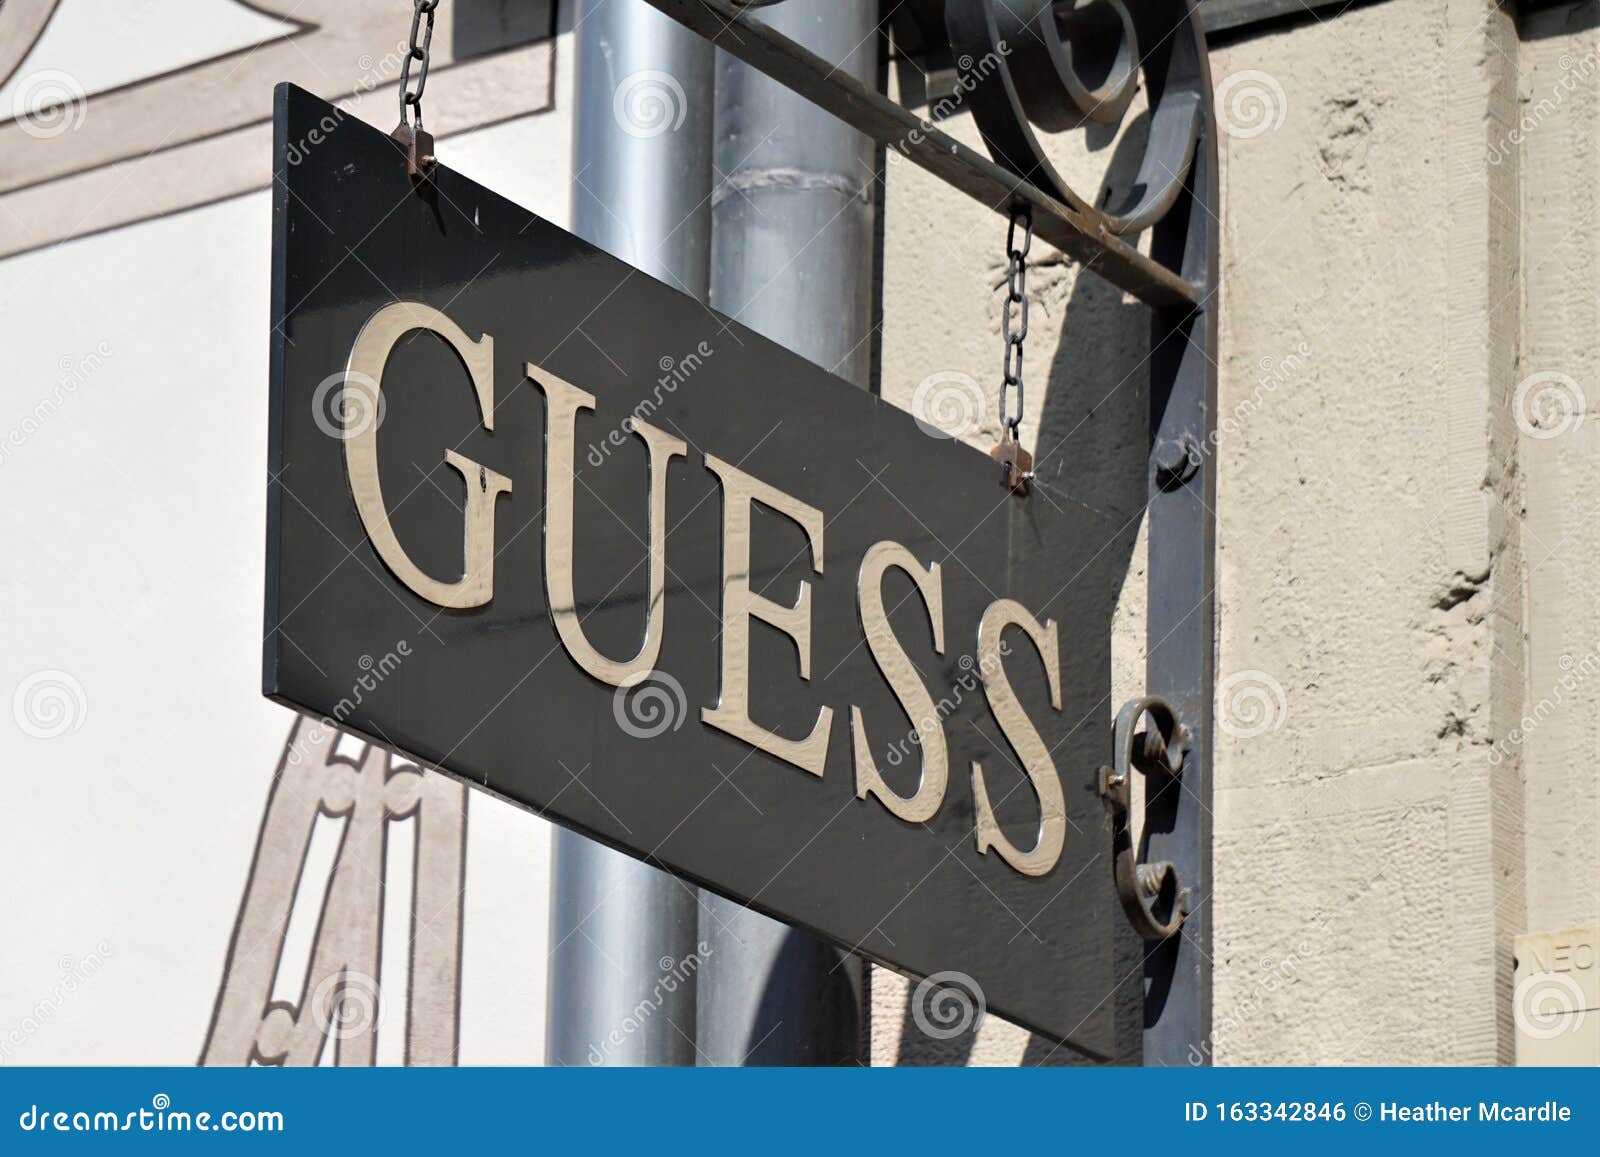 Guess Brand Name Sign Hanging on Building Exterior Editorial Photo ...